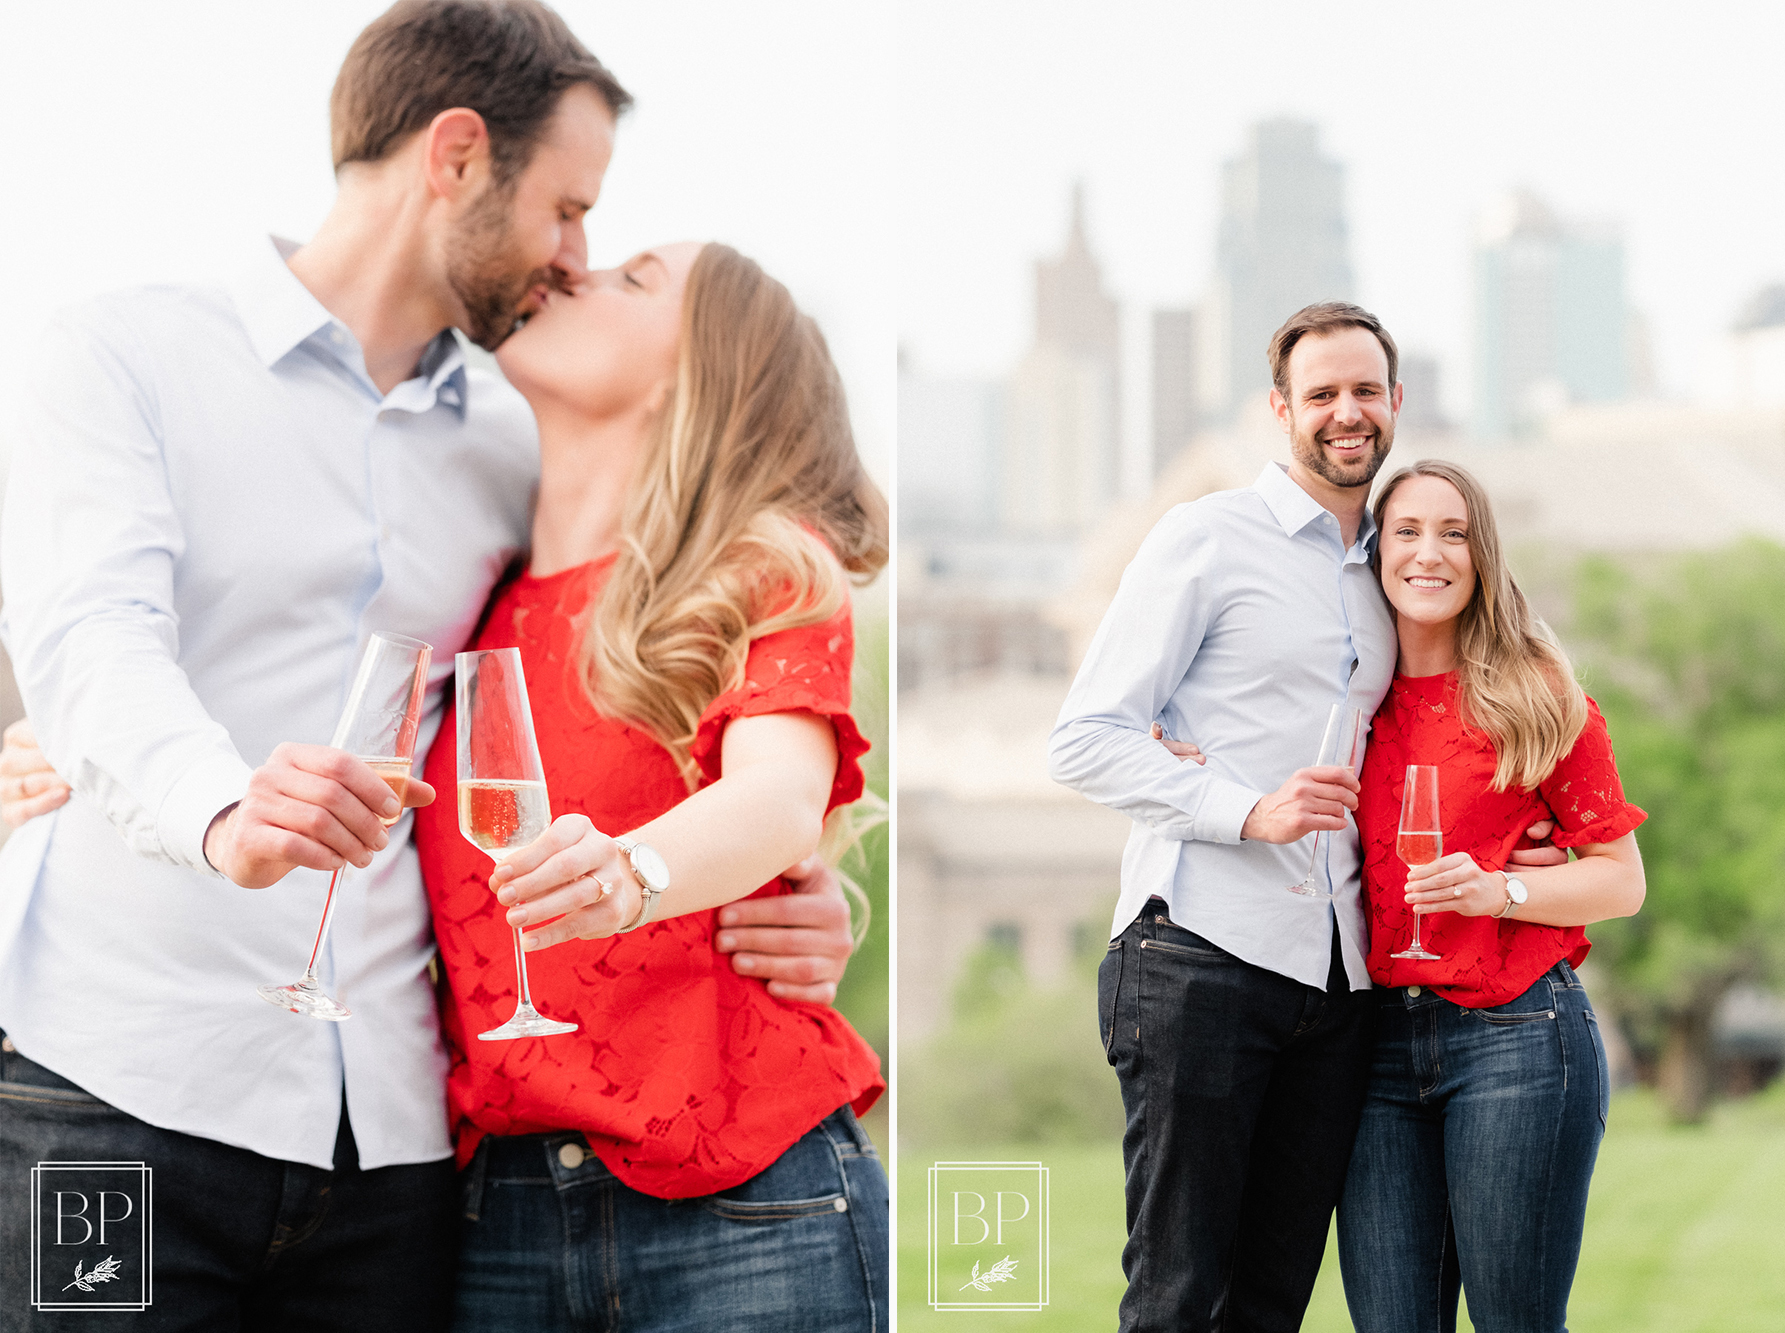 couple's springtime evening surprise proposal champagne toast at Union Station in Kansas City, MO